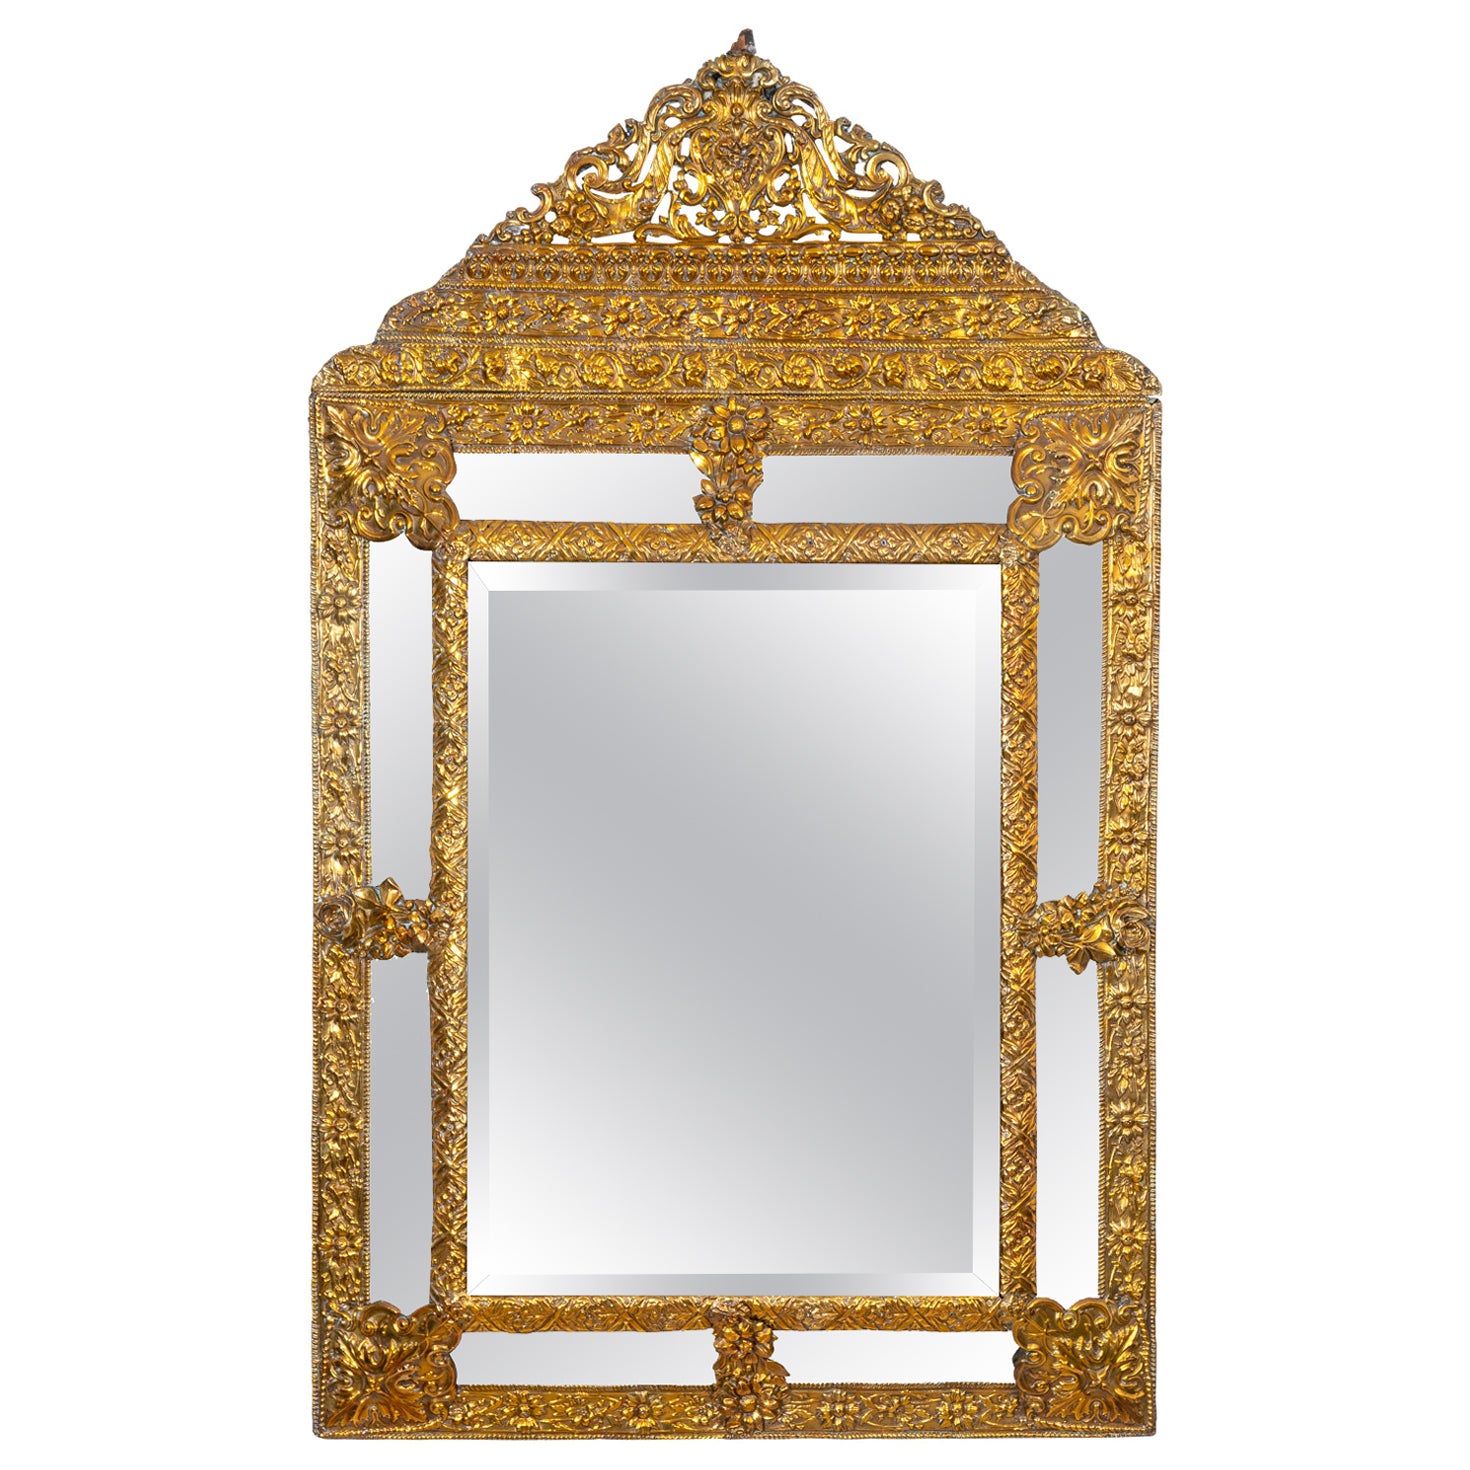 Early 19th Century Dutch Repousse Mirror